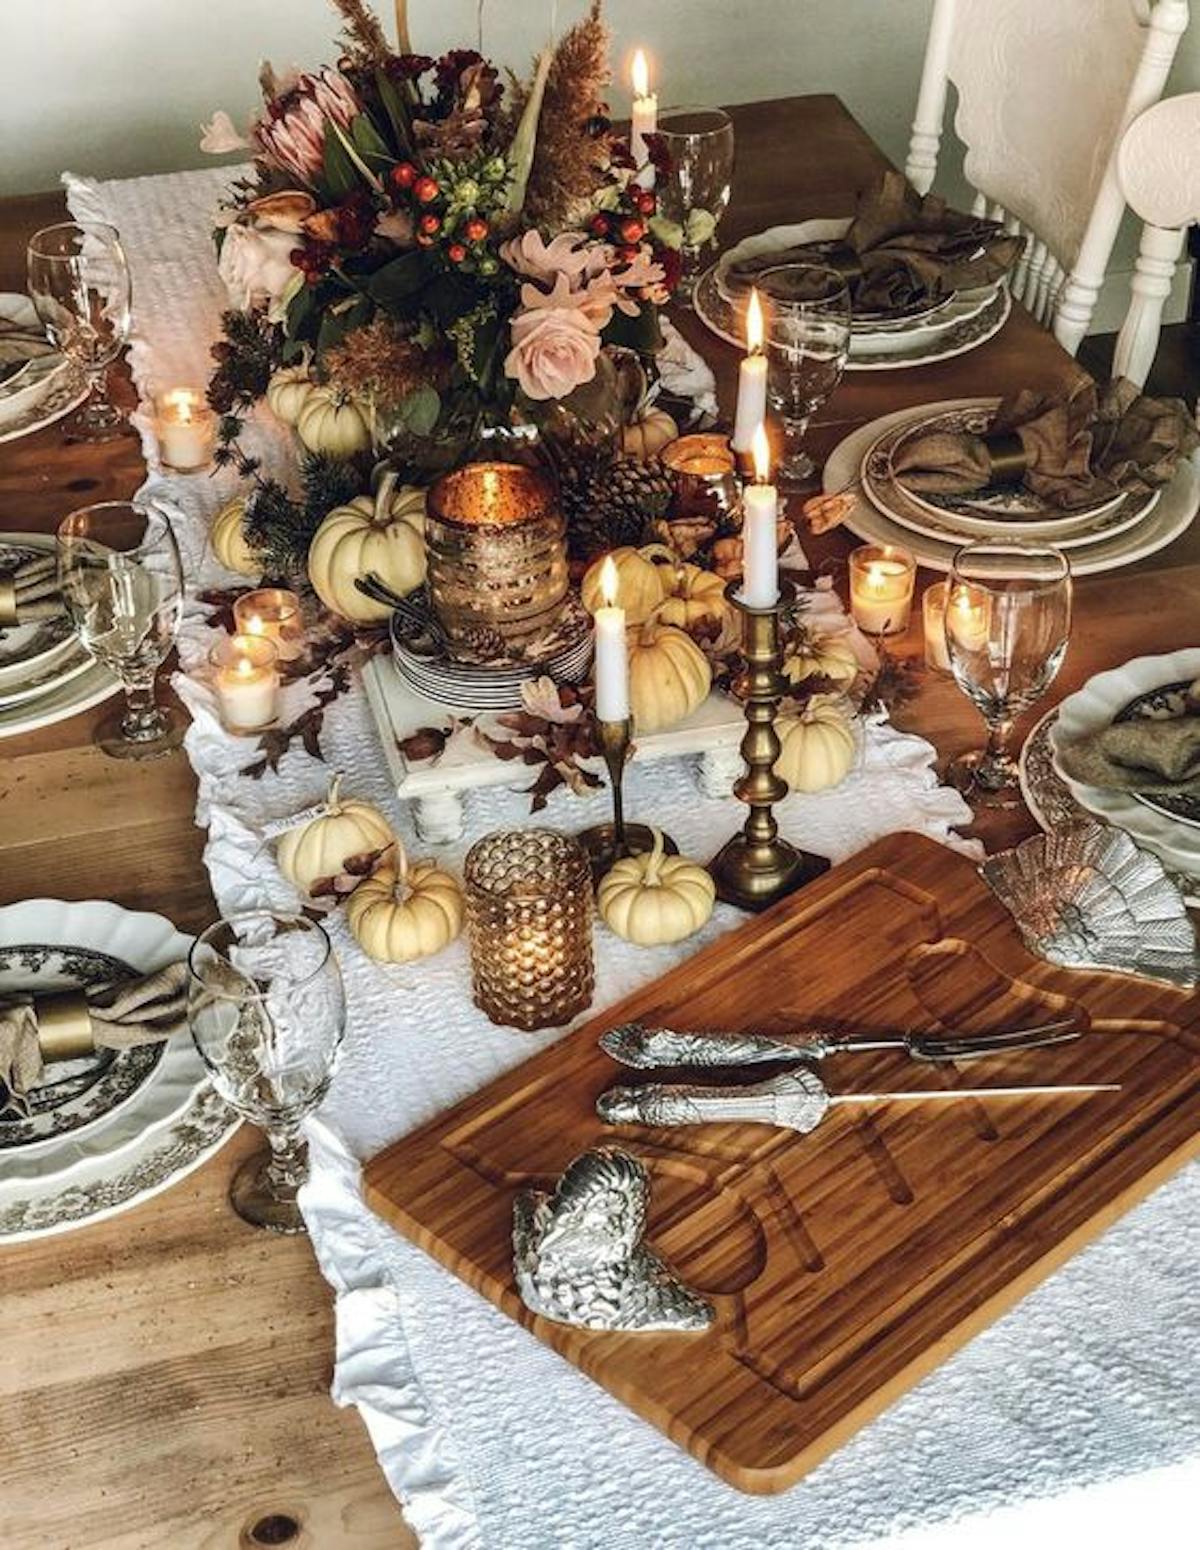  Beautiful Table Runner inspiration with gathered frills